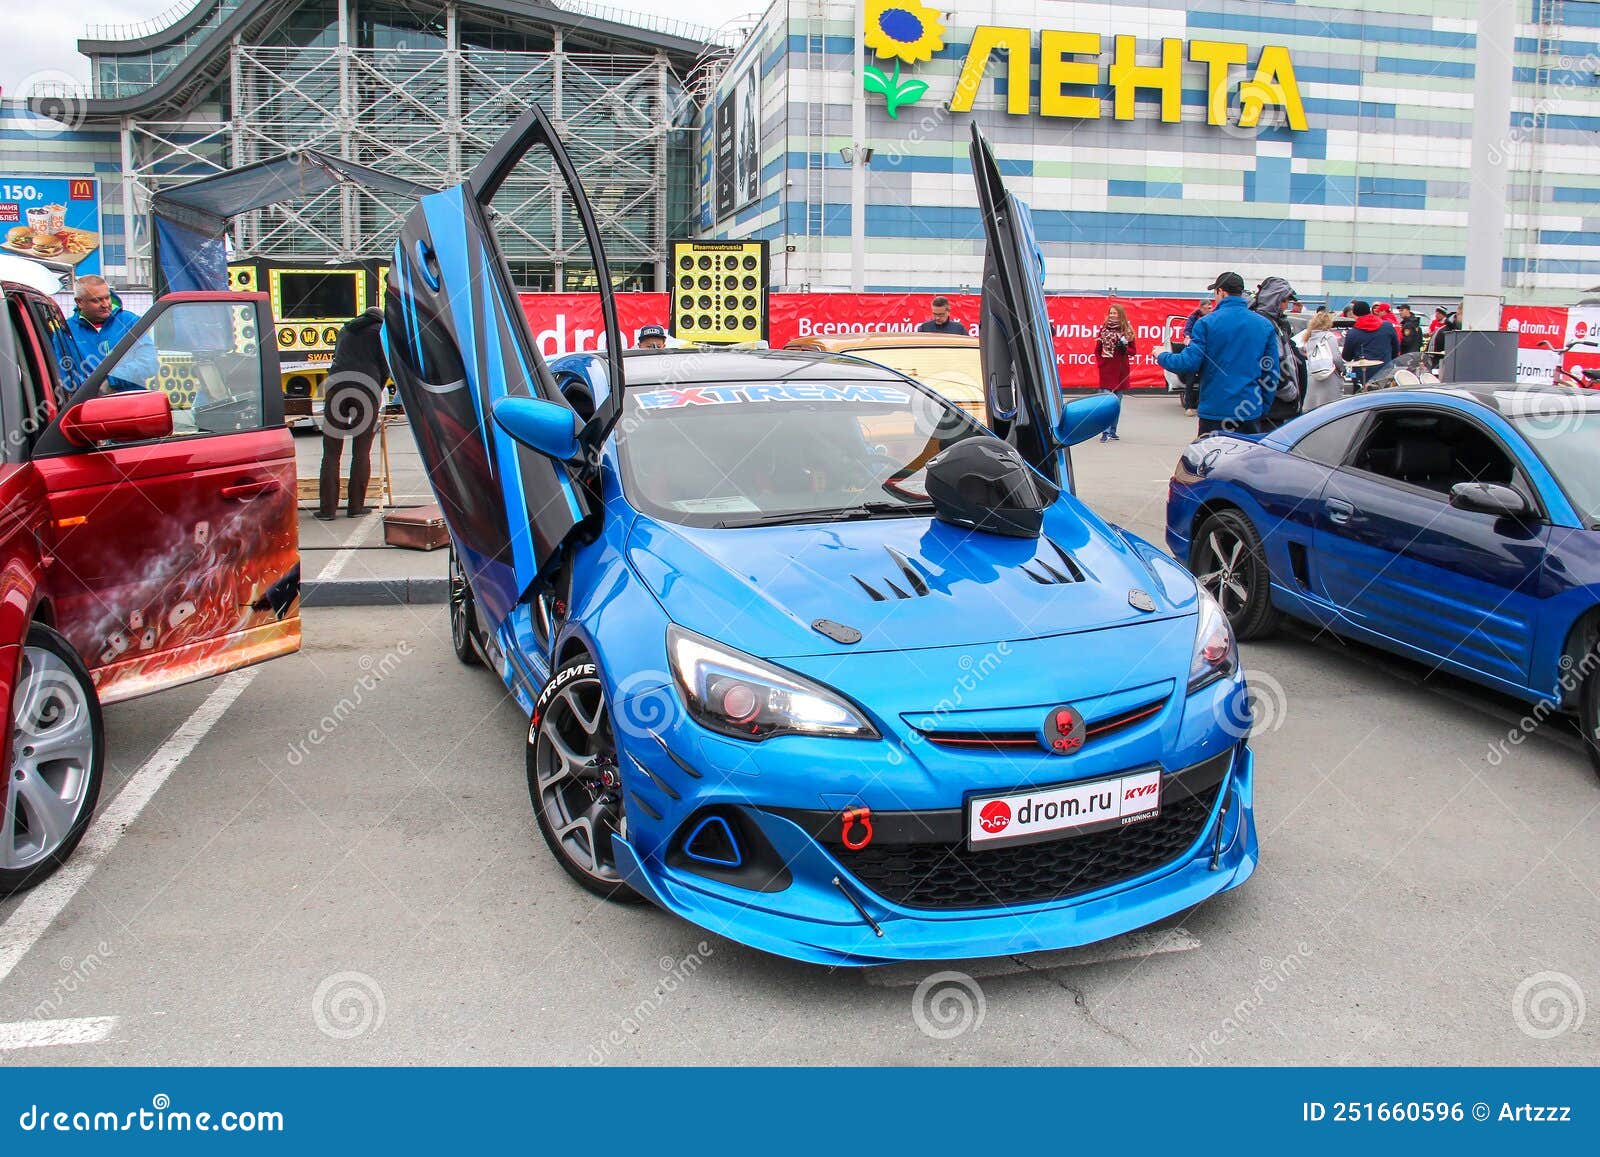 Opel Astra J OPC editorial photo. Image of outdoors - 251660596